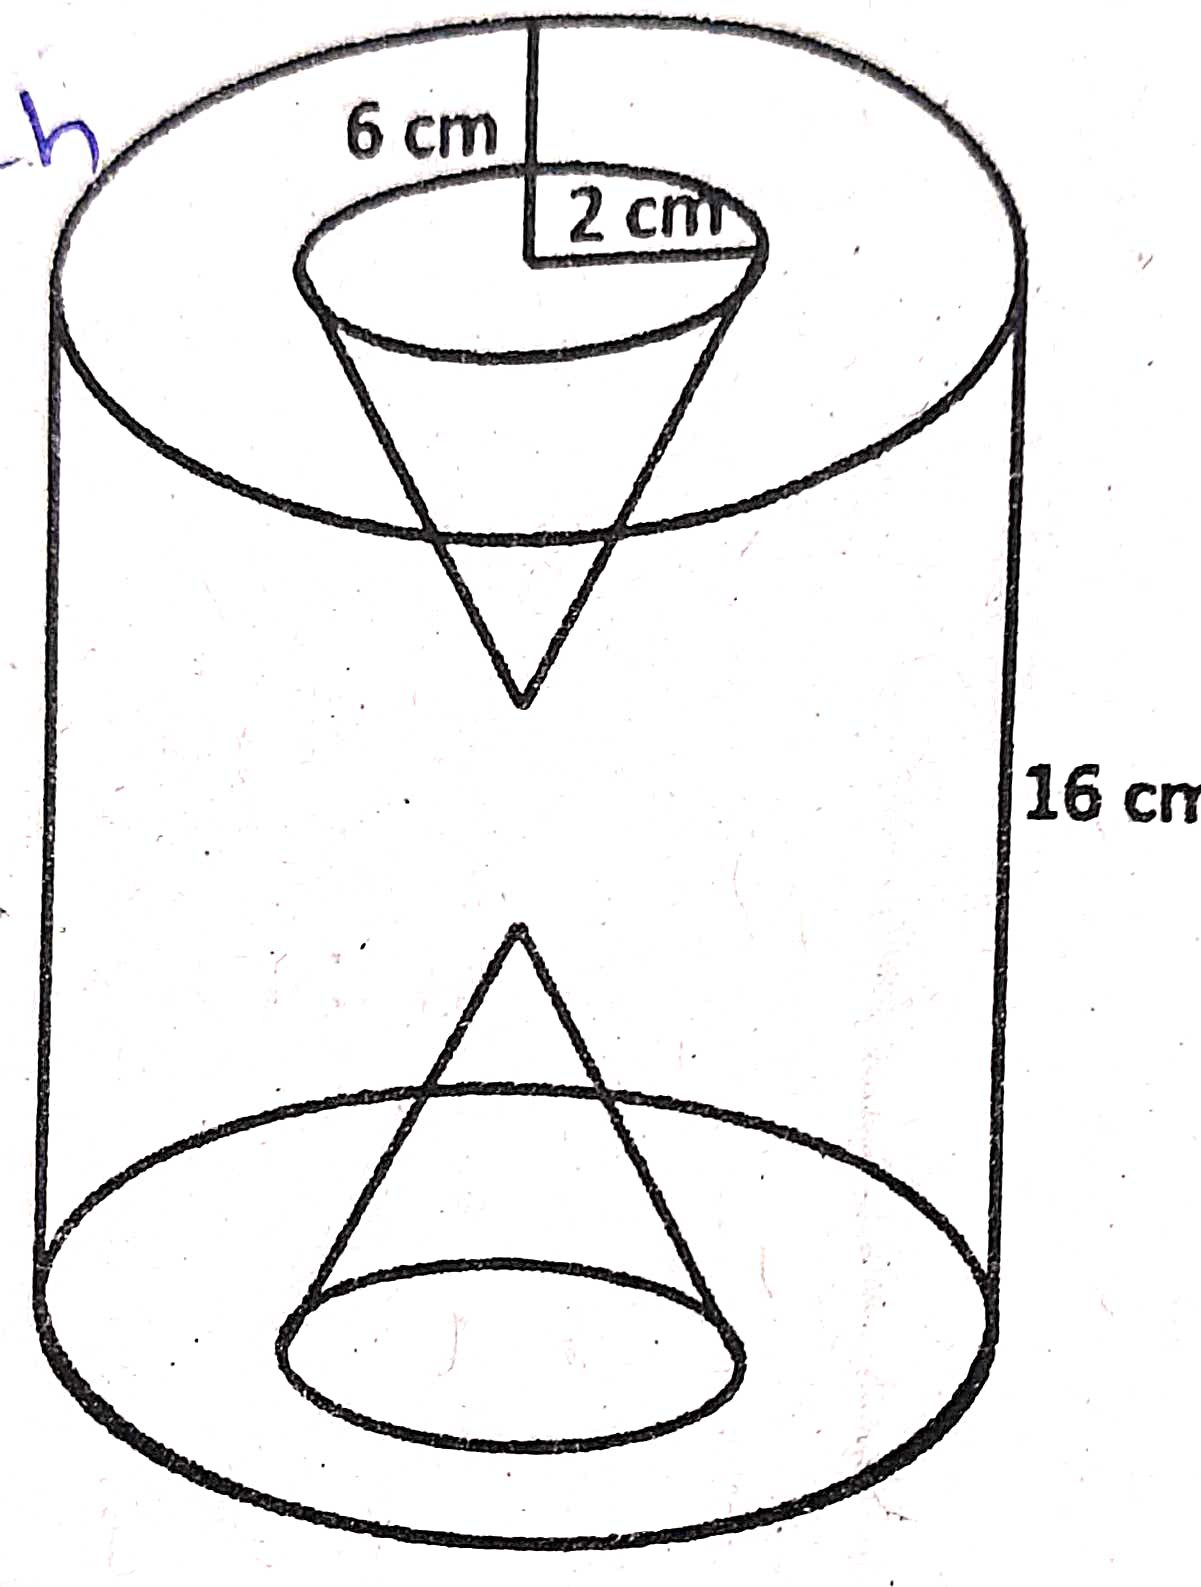 A solid wooden cylinder is of radius 6 cm and height 16 cm. Two cones each of radius 2 cm and height 6 cm are drilled out of the cylinder. Find the volume of the remaining solid.